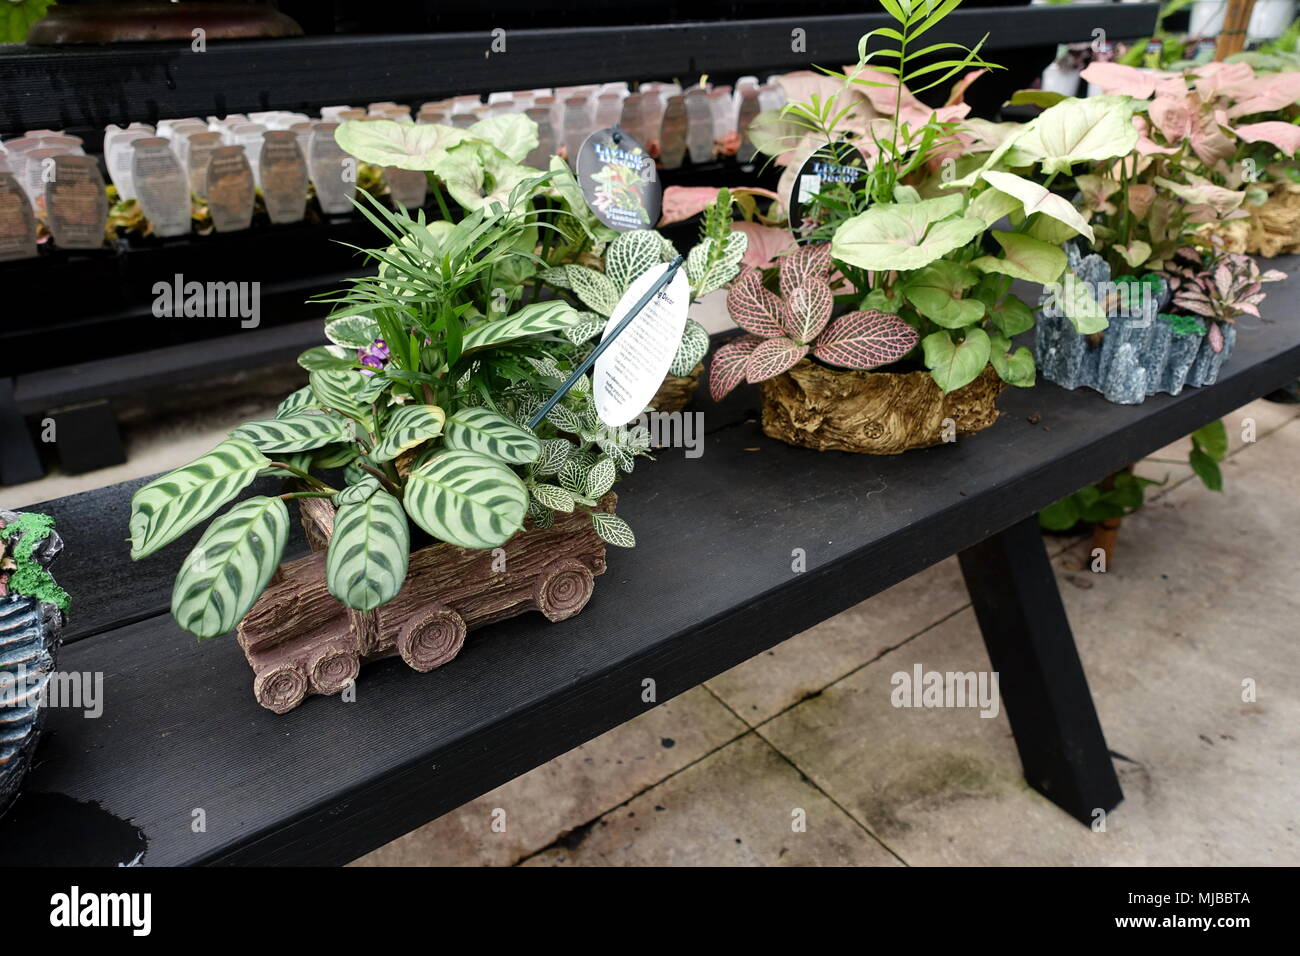 Selections of indoor plants in decorative pots Stock Photo